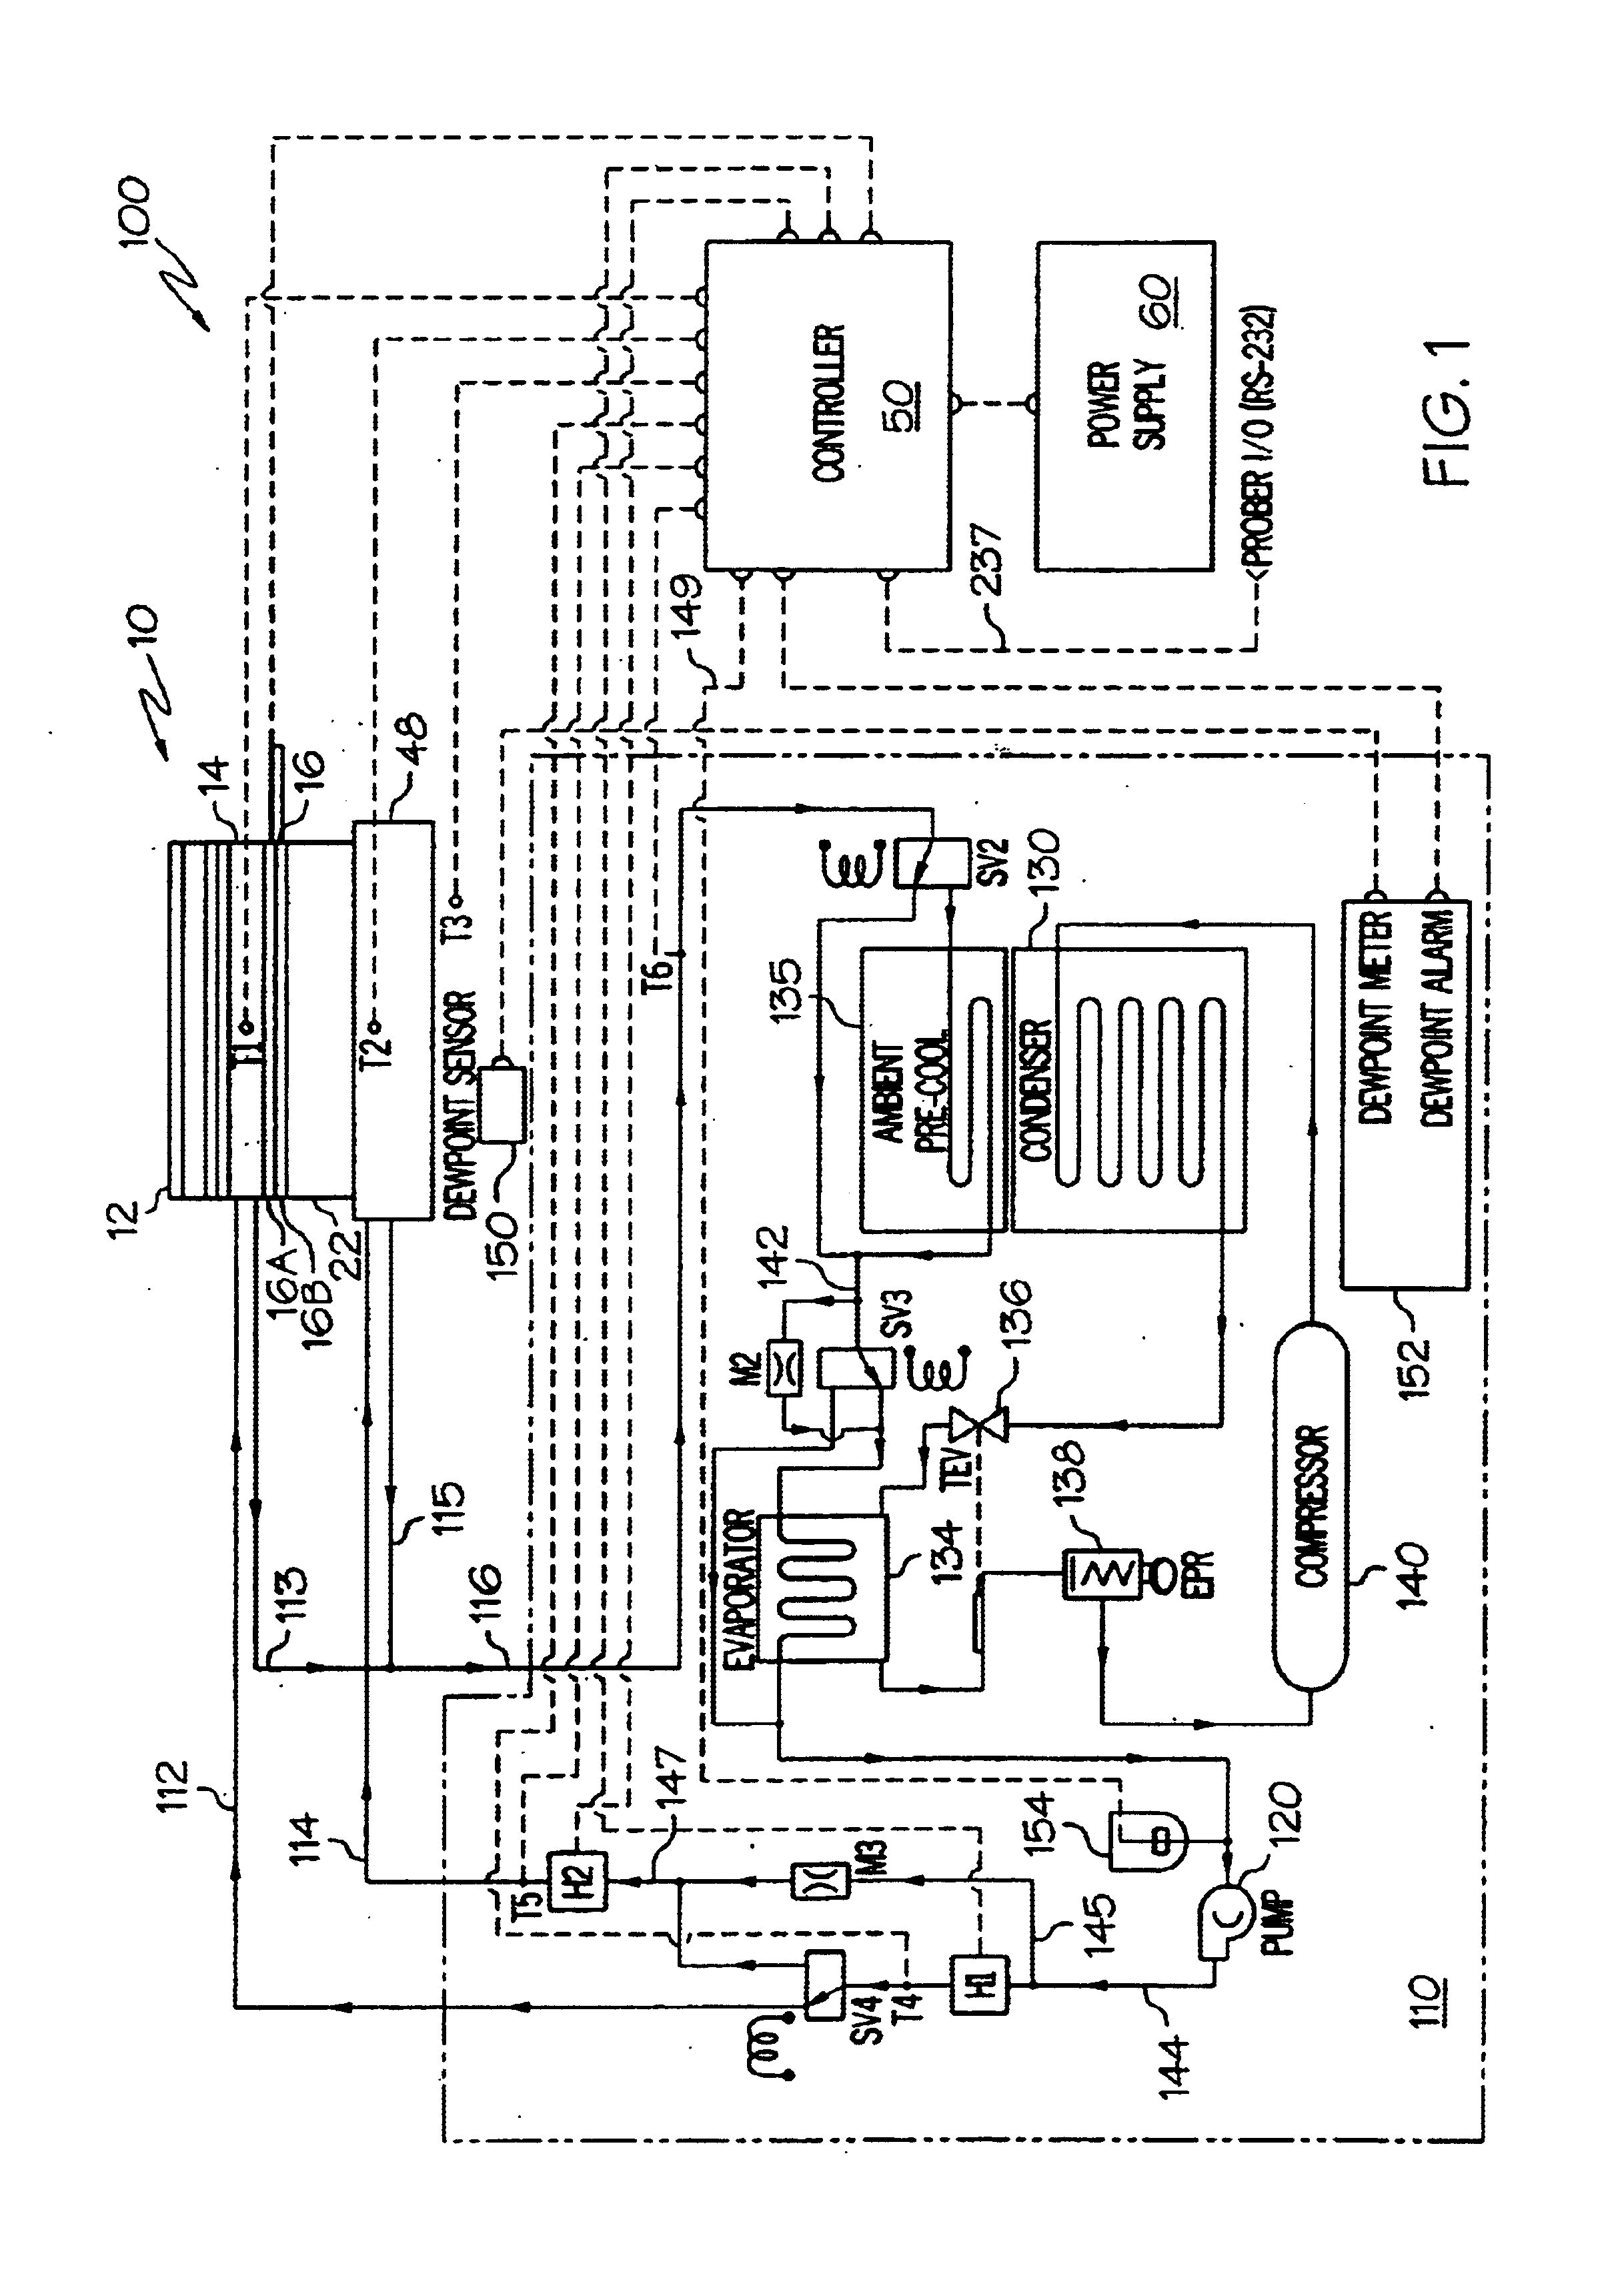 Temperature-controlled chuck with recovery of circulating temperature control fluid